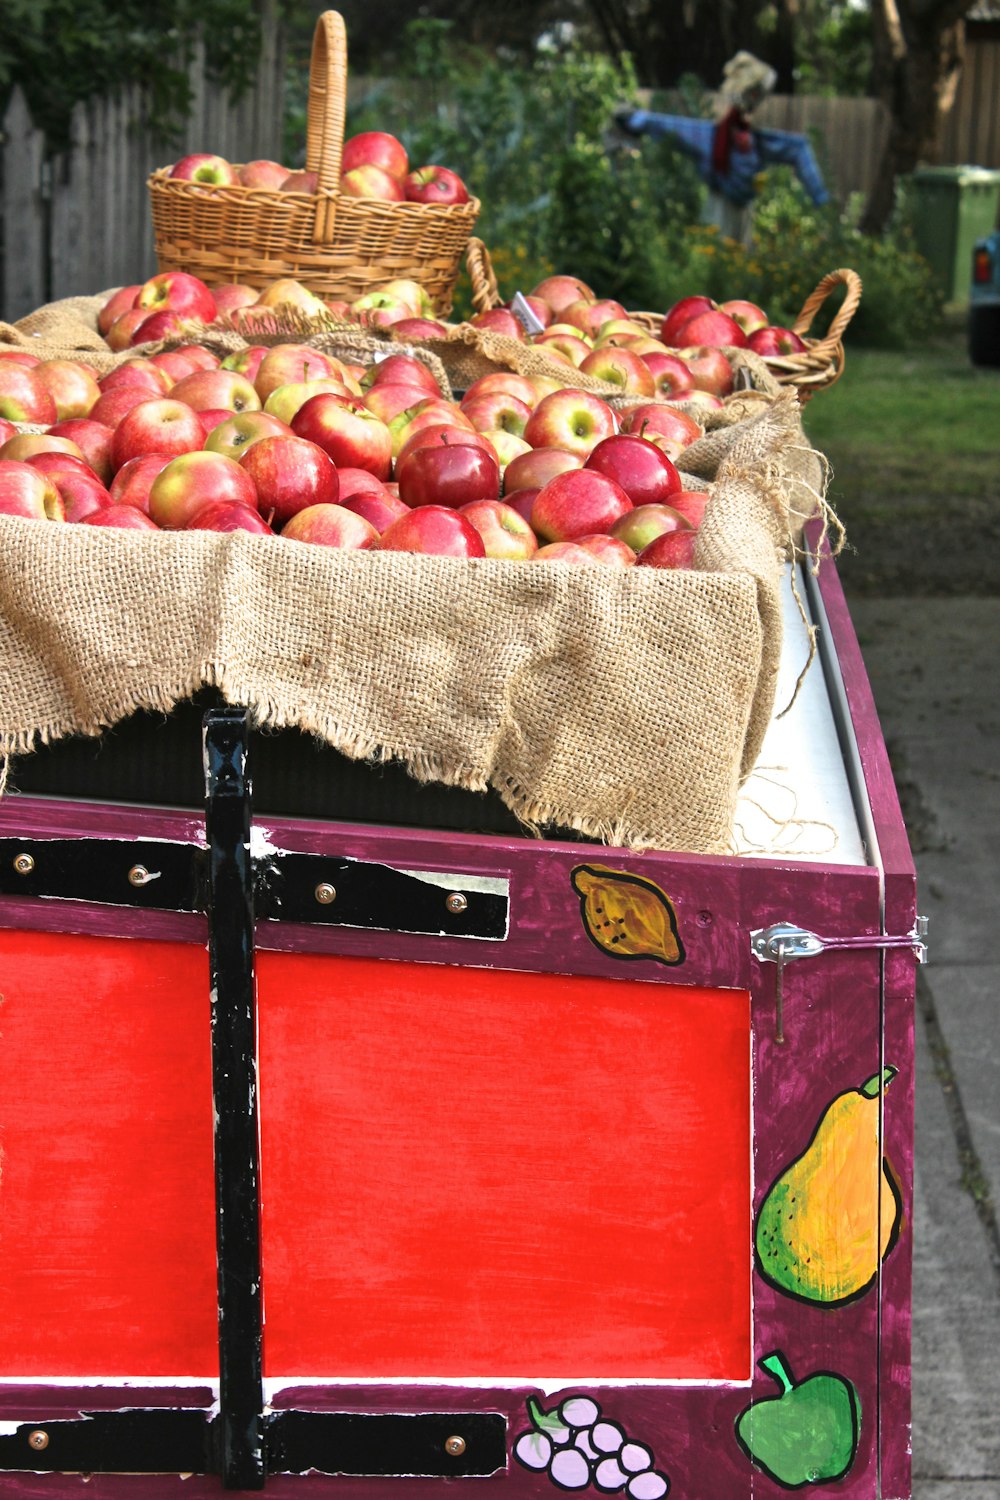 a truck filled with lots of red and green apples